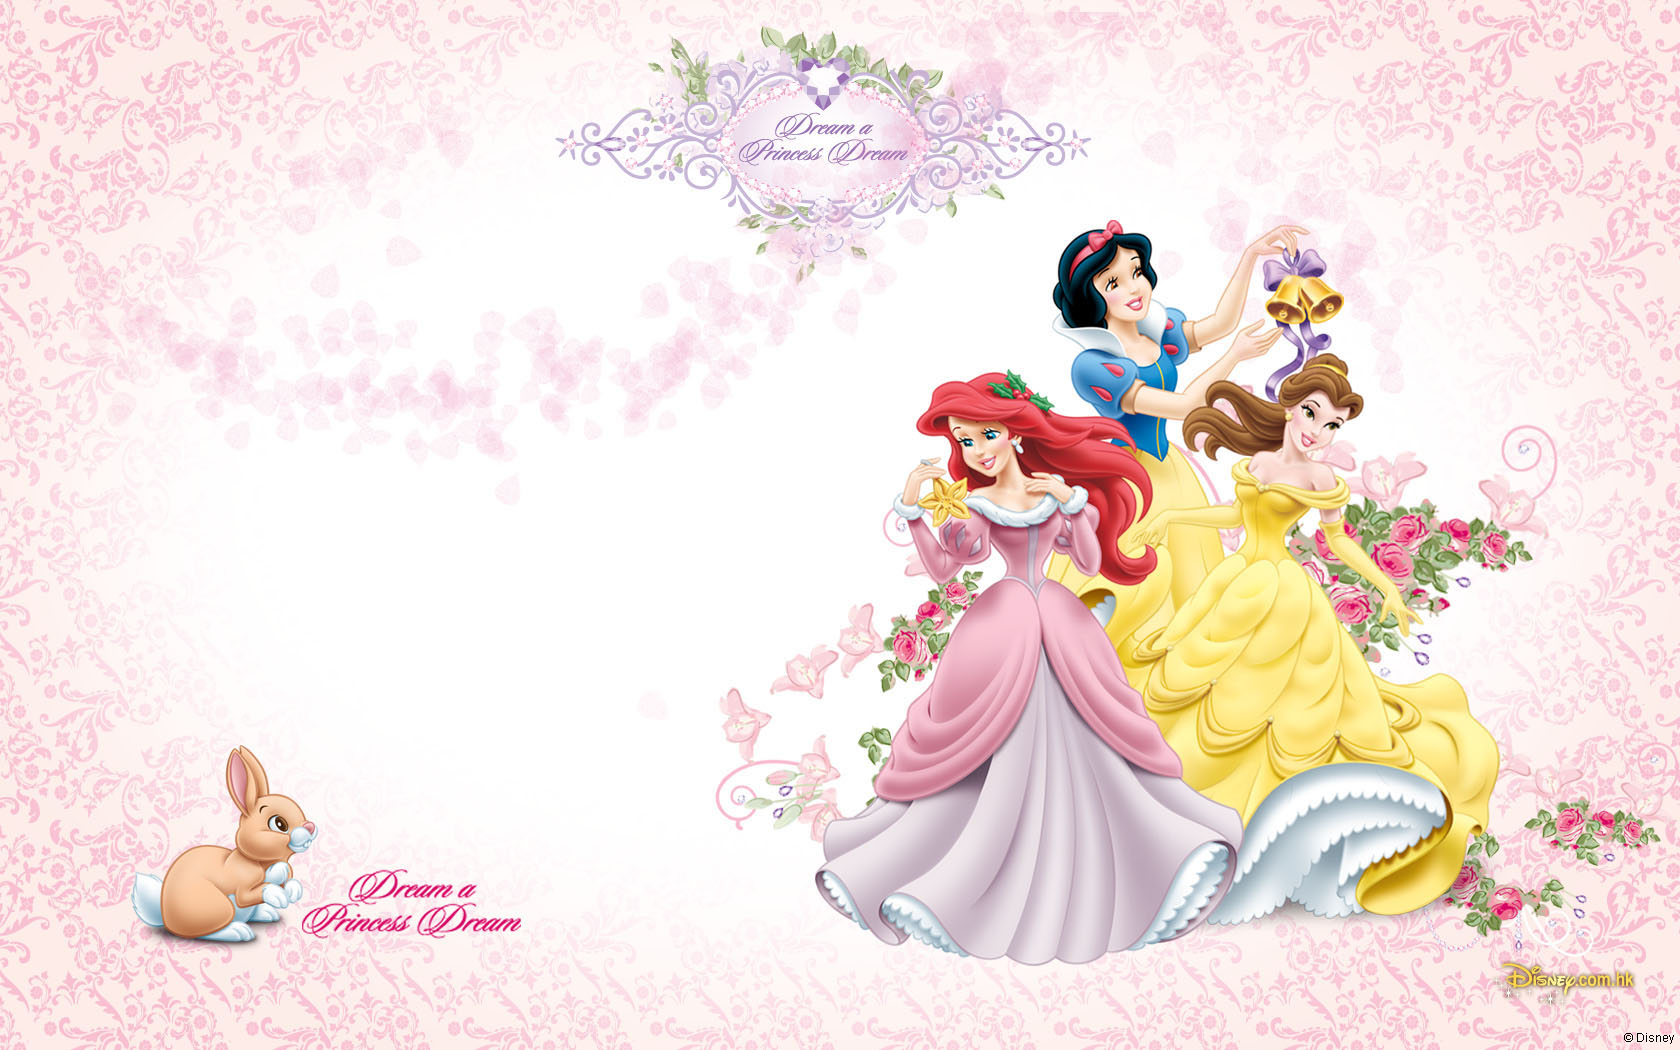 Disney princesses Ariel, Snow White, and Belle with a cute rabbit on a beautiful movie-themed desktop wallpaper.